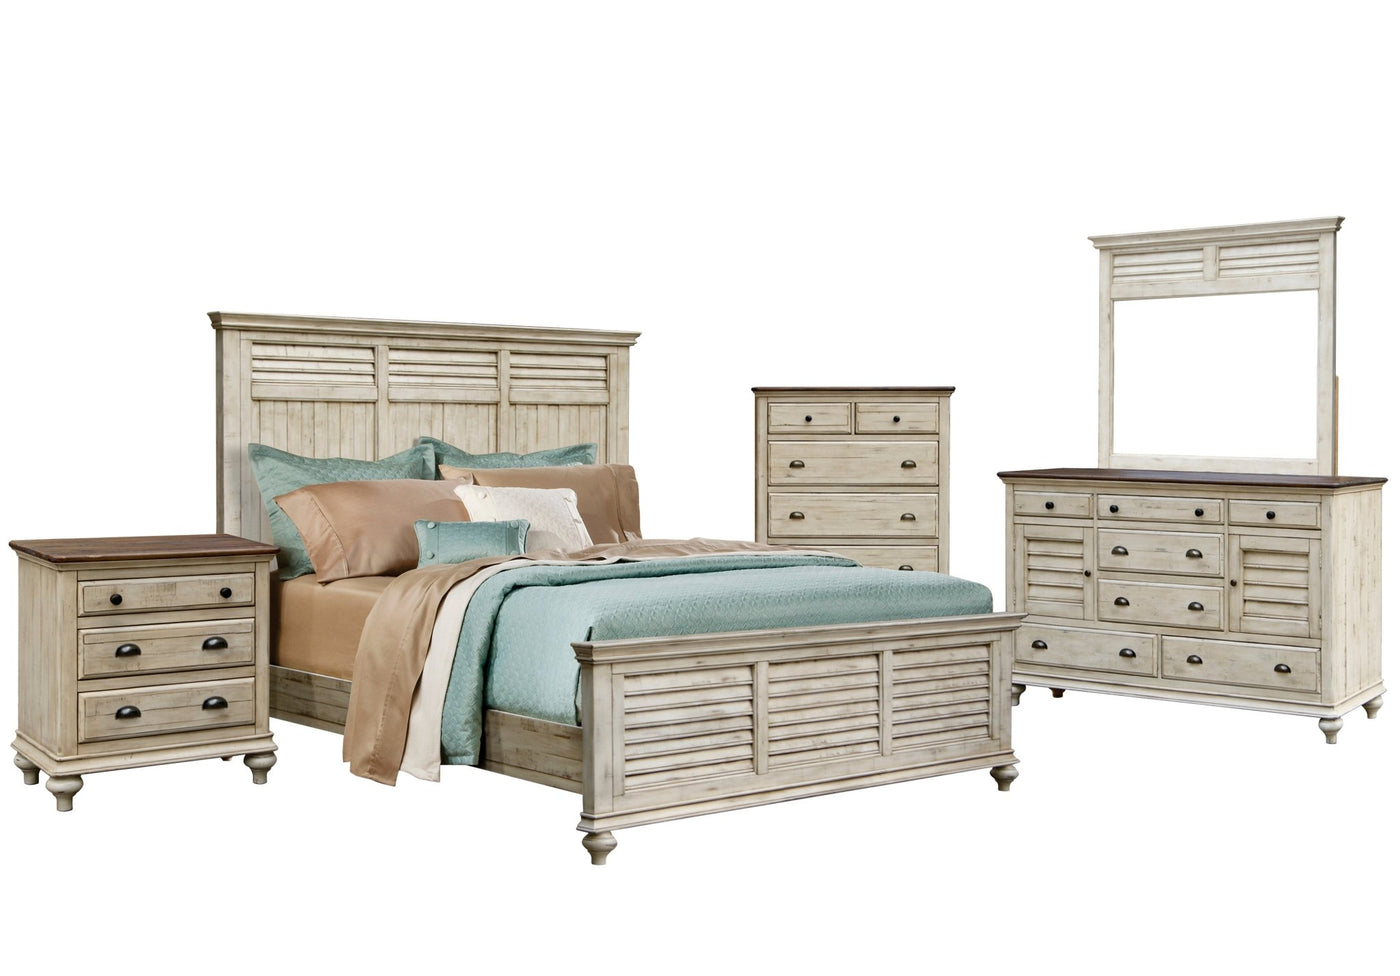 Sunset Trading Shades of Sand 5 Piece King Bedroom Set